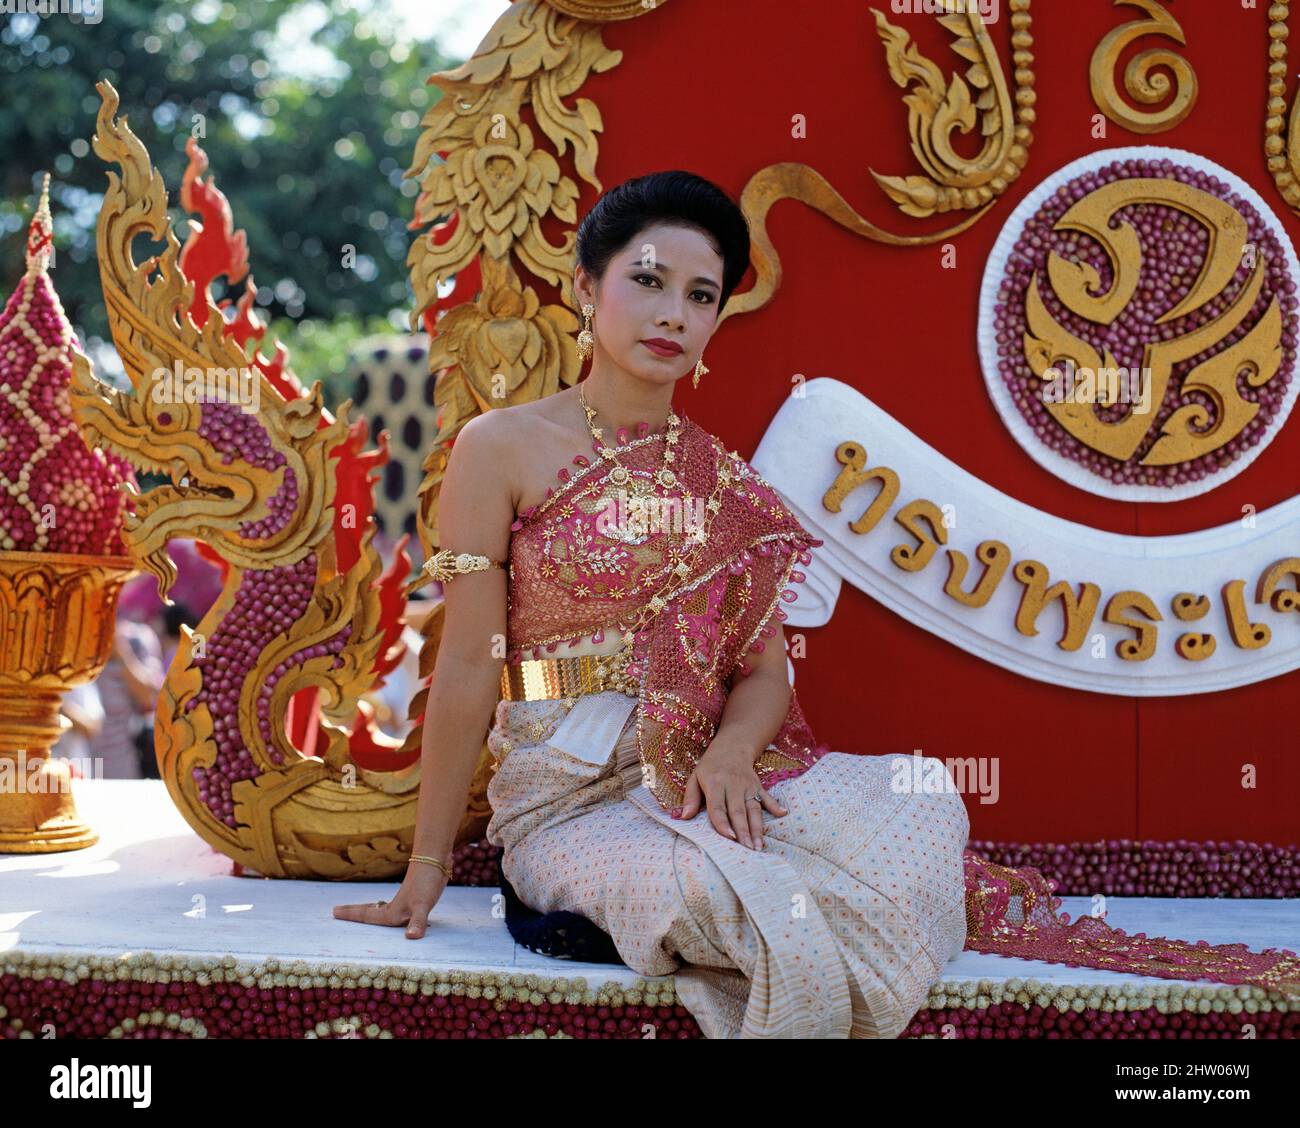 Thailand. Chiang Mai. Young Thai woman on carnival float. Stock Photo